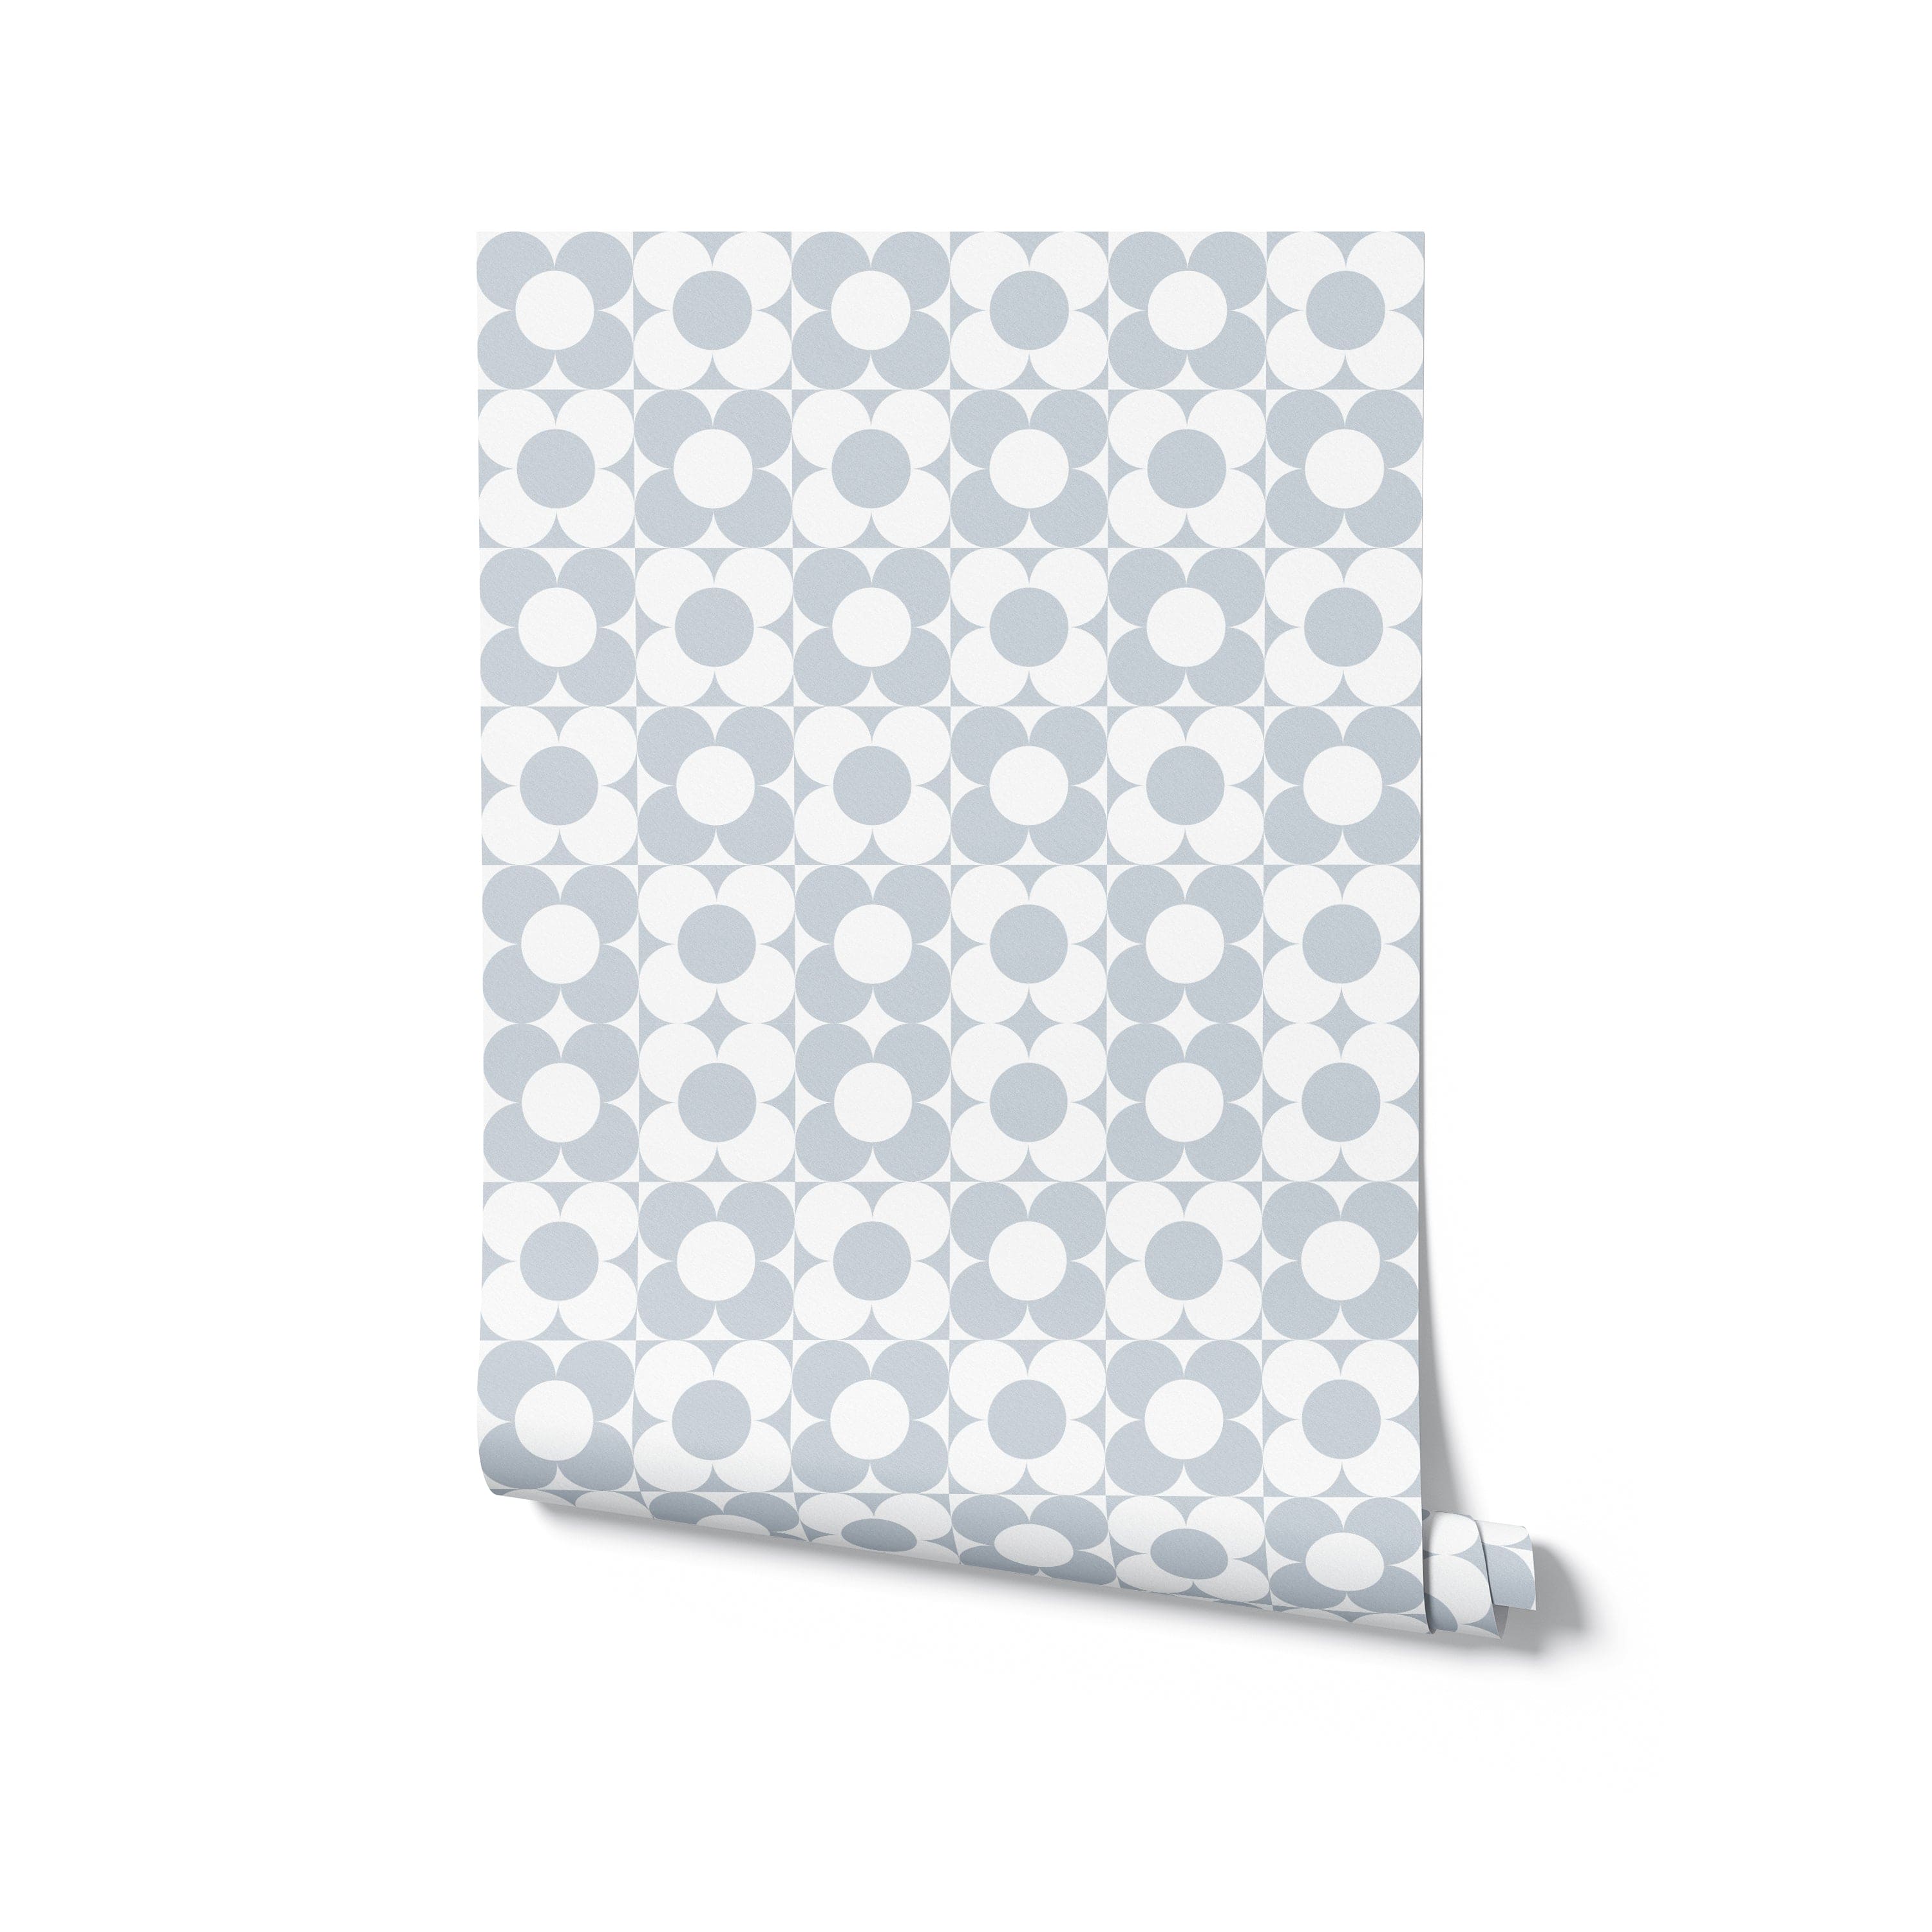 Single roll of Vintage Groovy Wallpaper - Pale Blue displayed against a plain background, highlighting the groovy circular patterns in soft blue and gray tones, ideal for adding a touch of vintage charm to any room